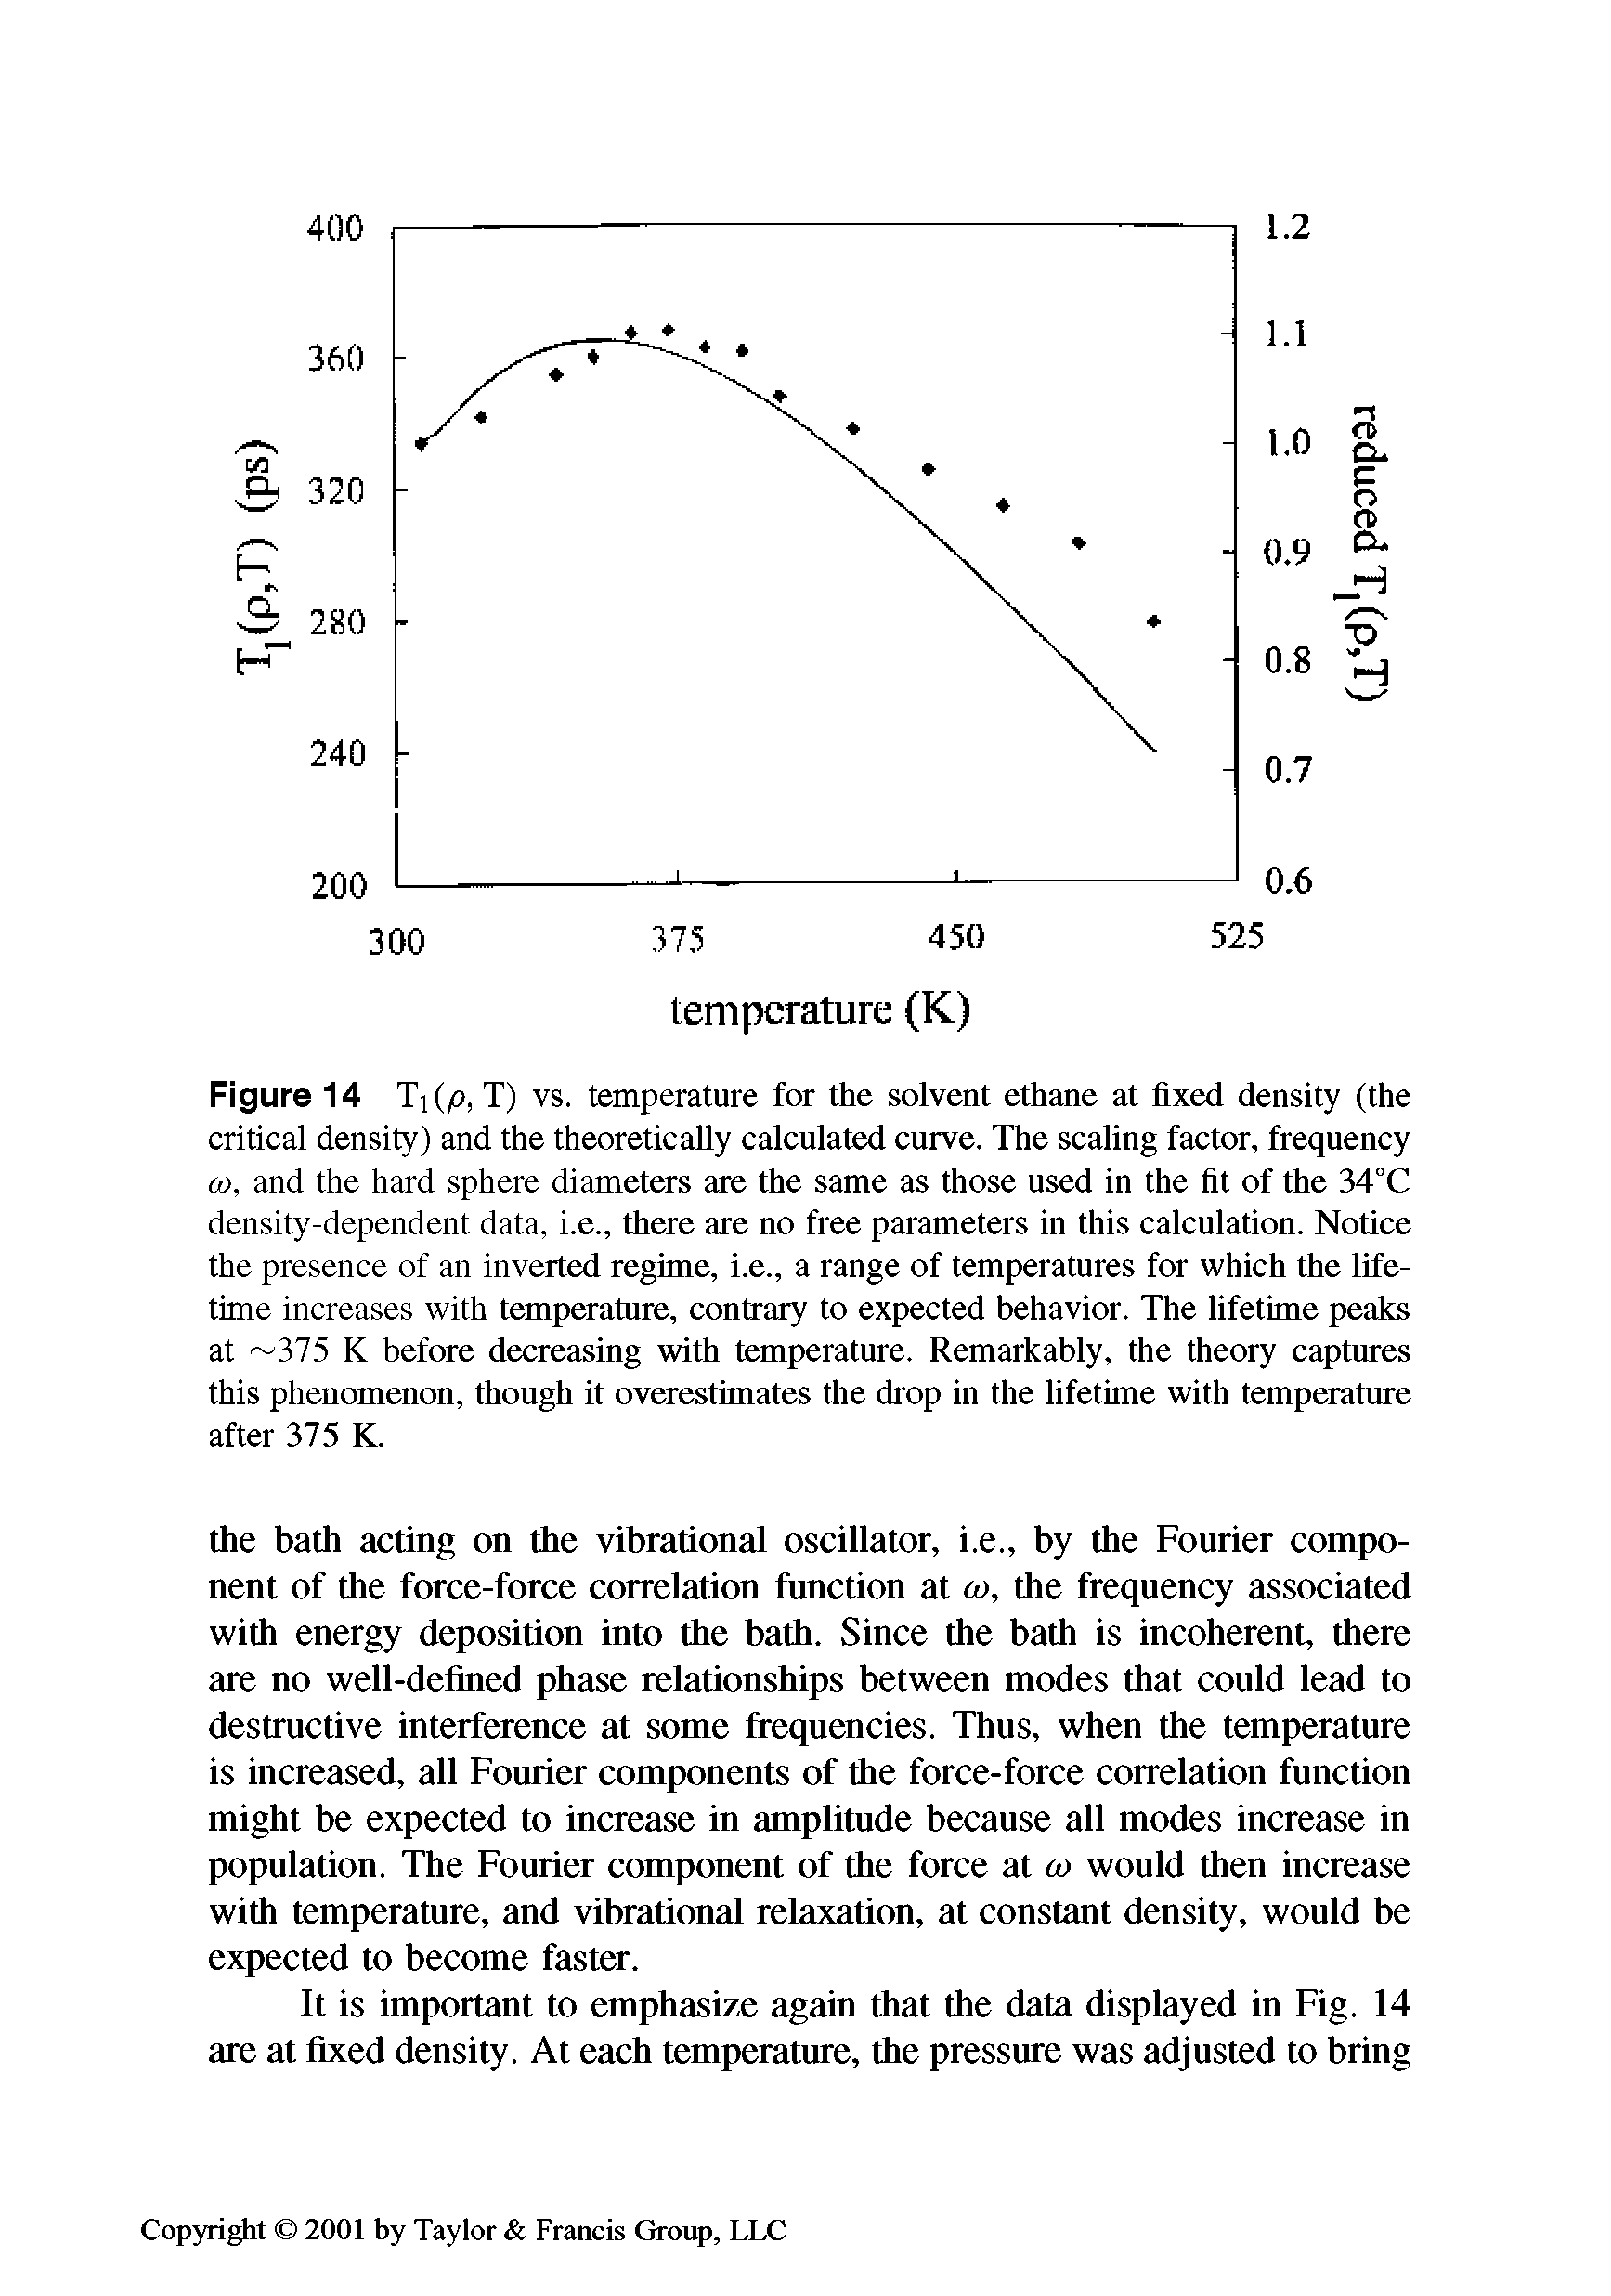 Figure 14 Ti (p, T) vs. temperature for the solvent ethane at fixed density (the critical density) and the theoretically calculated curve. The scaling factor, frequency co, and the hard sphere diameters are the same as those used in the fit of the 34°C density-dependent data, i.e., there are no free parameters in this calculation. Notice the presence of an inverted regime, i.e., a range of temperatures for which the lifetime increases with temperature, contrary to expected behavior. The lifetime peaks at 375 K before decreasing with temperature. Remarkably, the theory captures this phenomenon, though it overestimates the drop in the lifetime with temperature after 375 K.